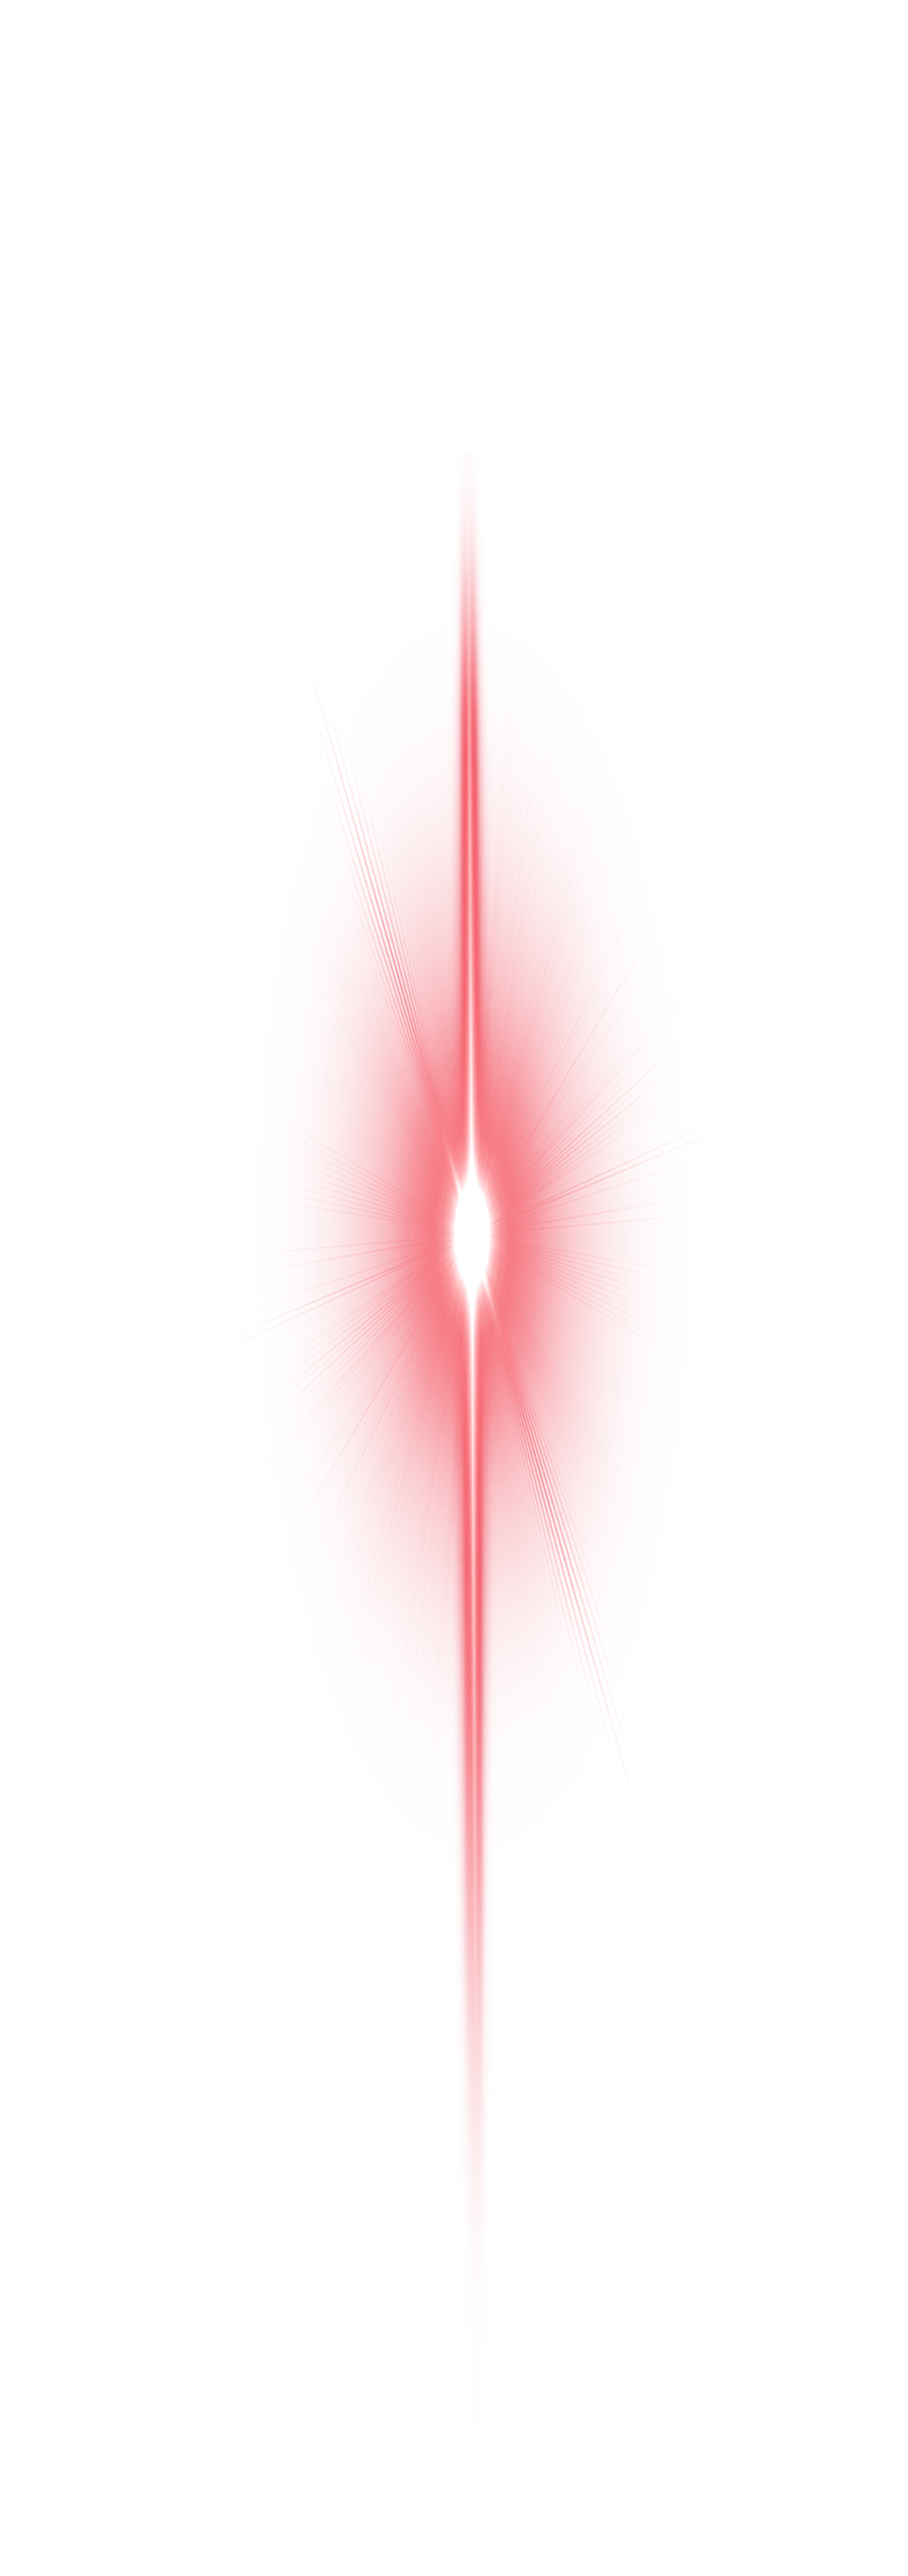 Light Effect Red Element Free HD Image Clipart